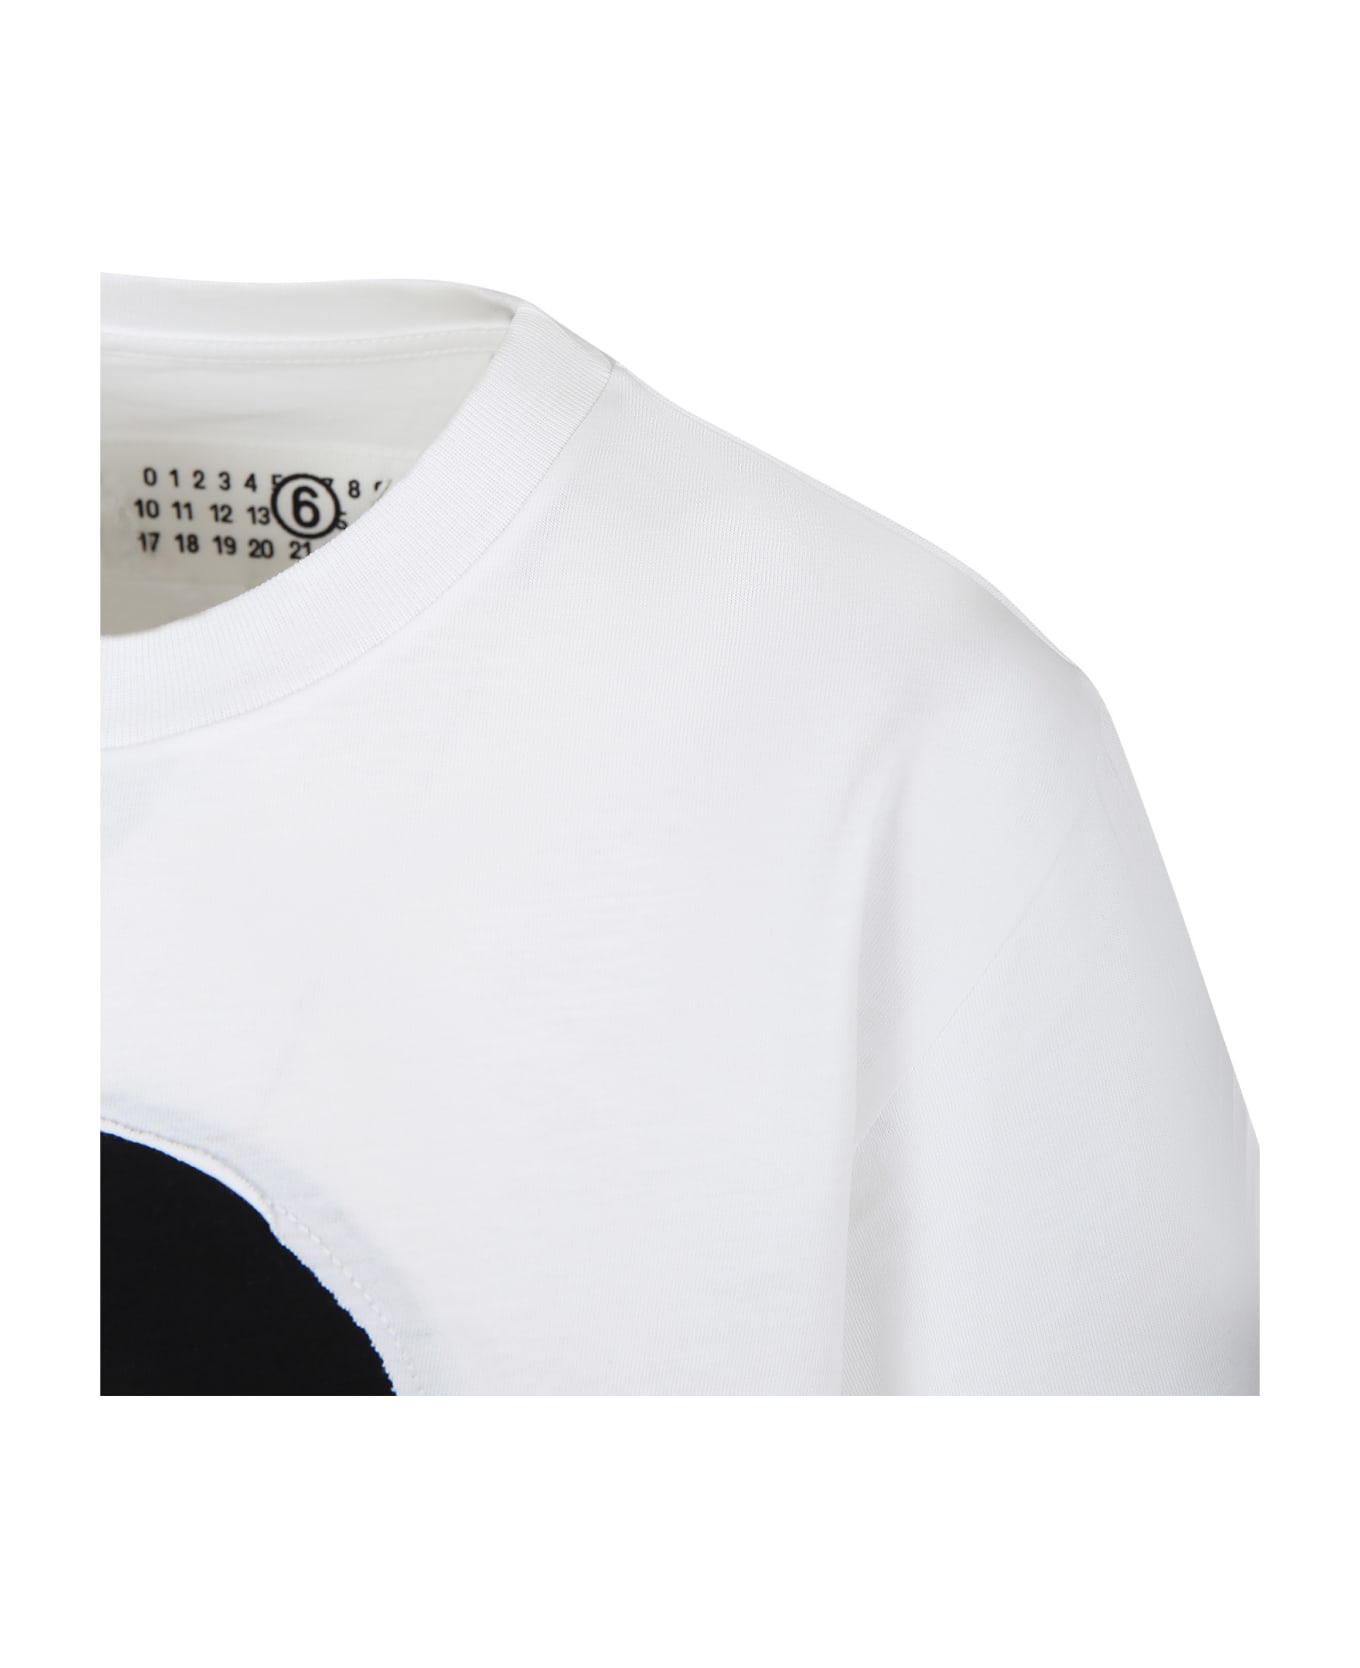 MM6 Maison Margiela White T-shirt For Kids With Number 6 - White